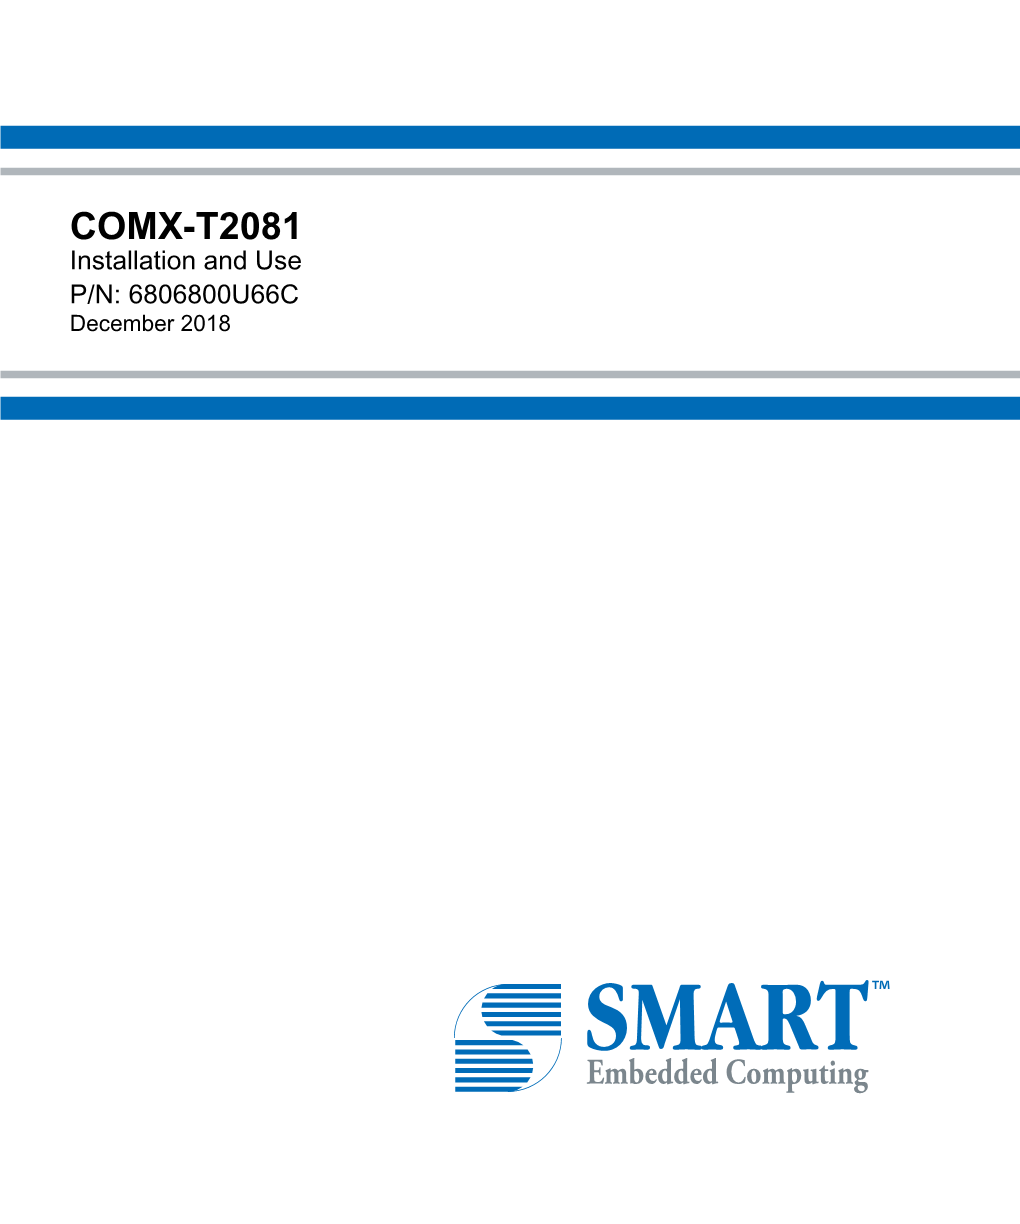 COMX-T2081 Installation and Use P/N: 6806800U66C December 2018 © 2019 SMART Embedded Computing™, Inc